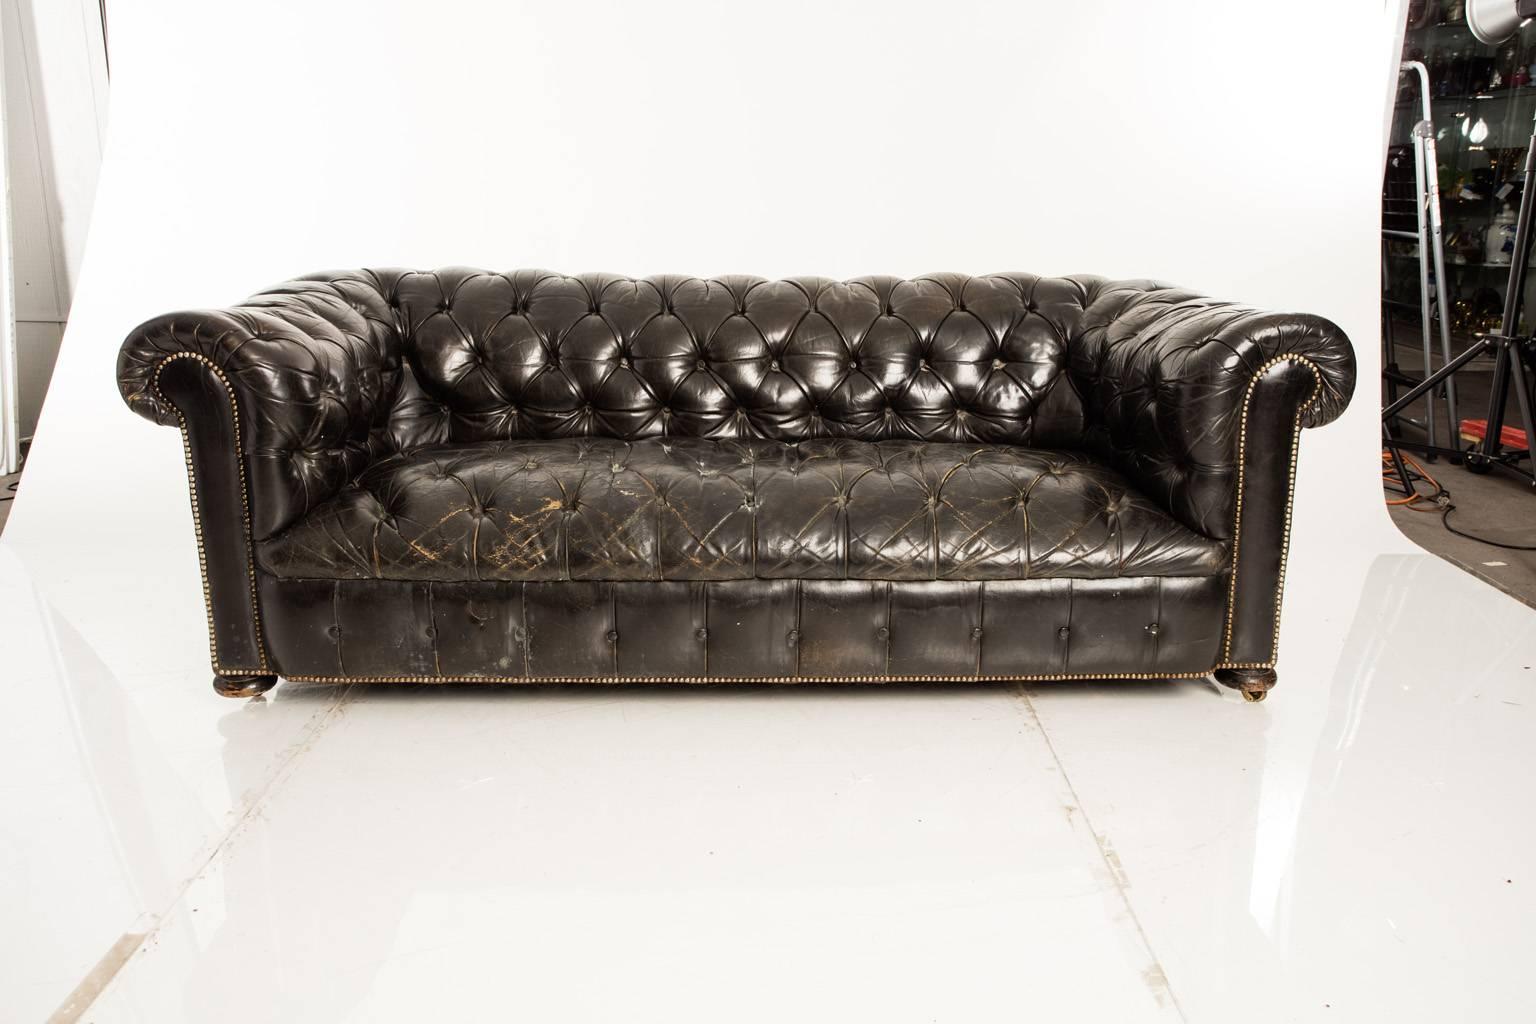 English chesterfield sofa. Distressed leather. On casters.